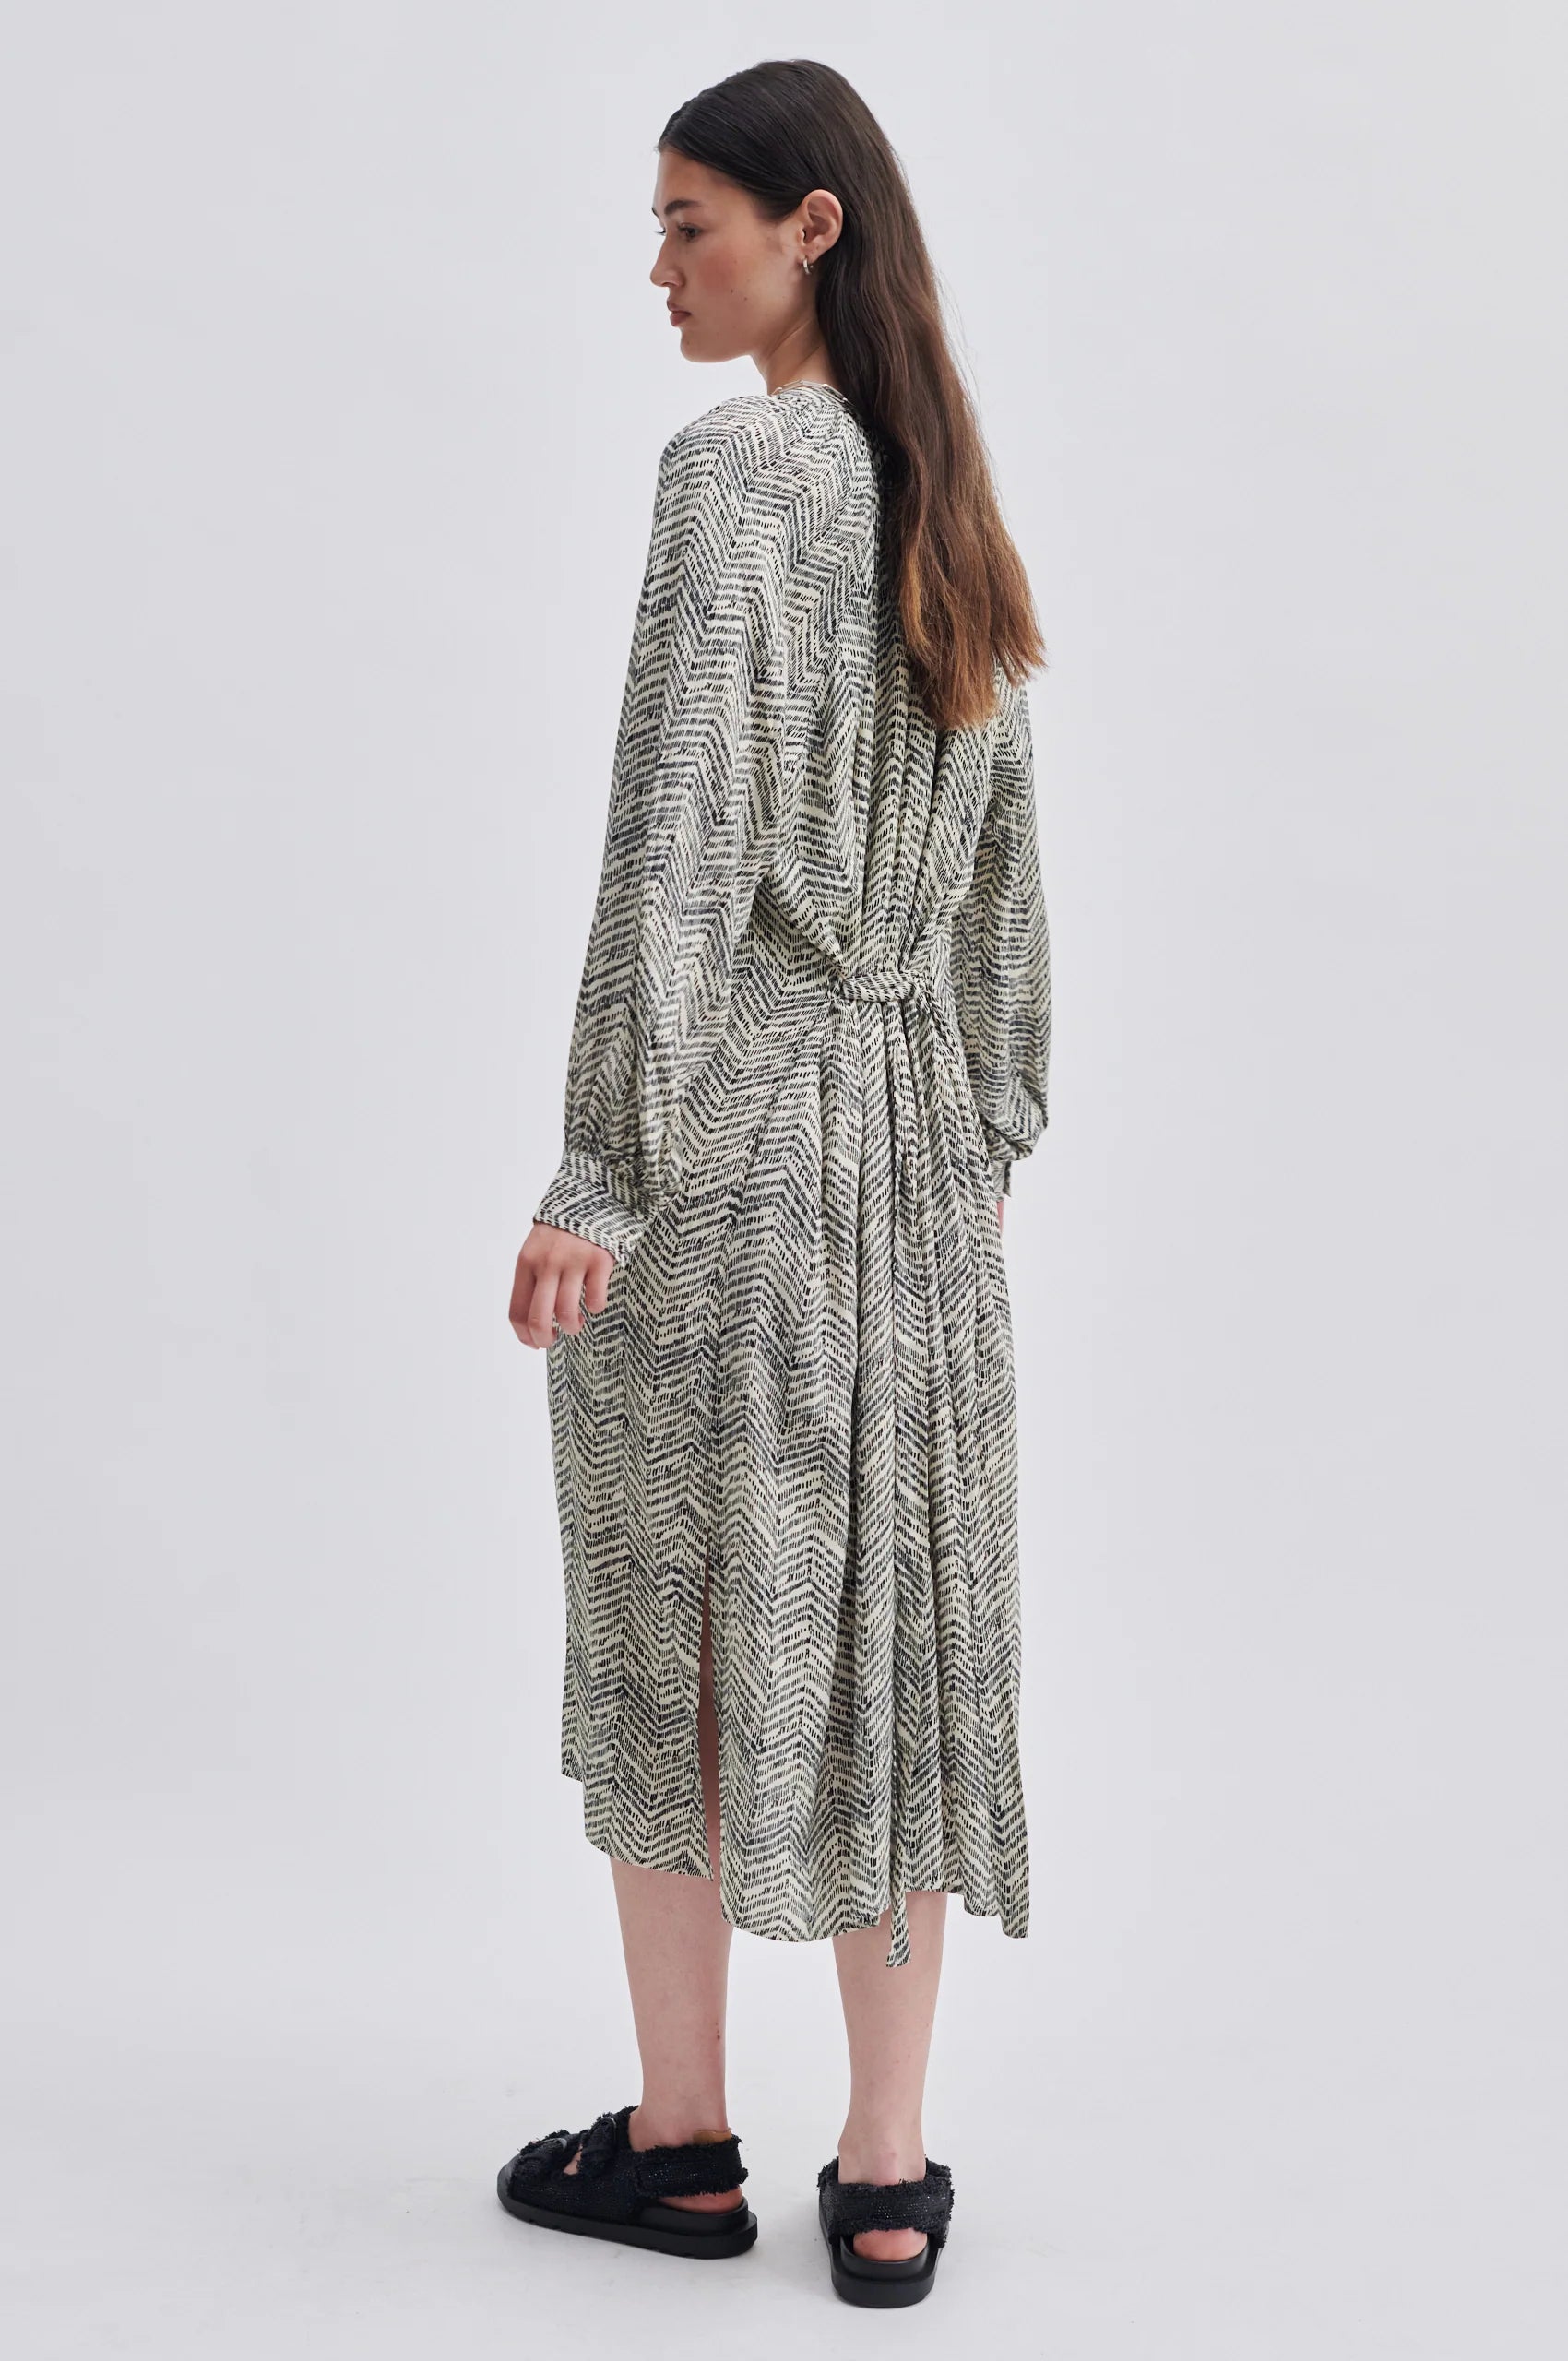 Notch neck midi dress with long gathered sleeves fabric self tie belt and ecru background with black zig zag printed fabric